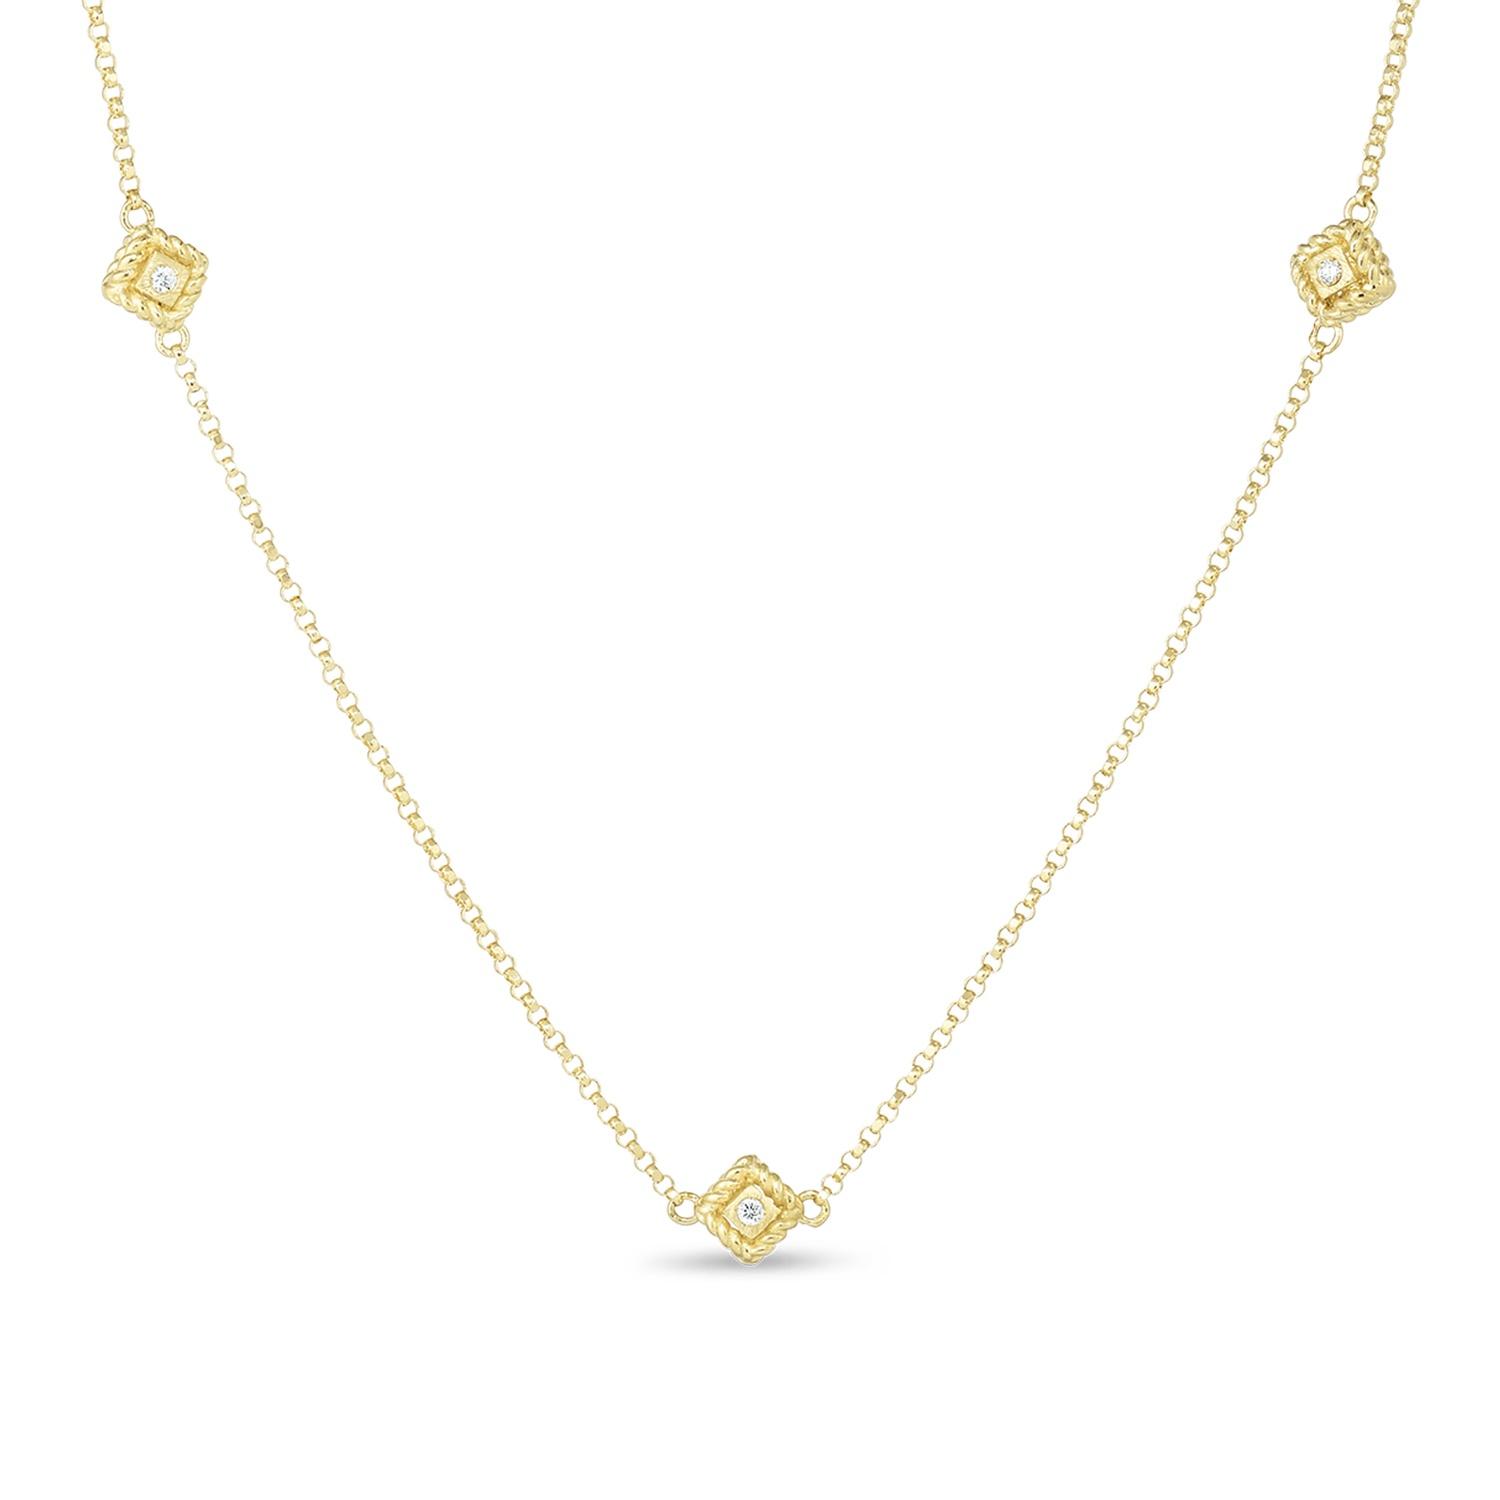 Roberto Coin 18k Yellow Gold Palazzo Ducale Diamond Station Necklace